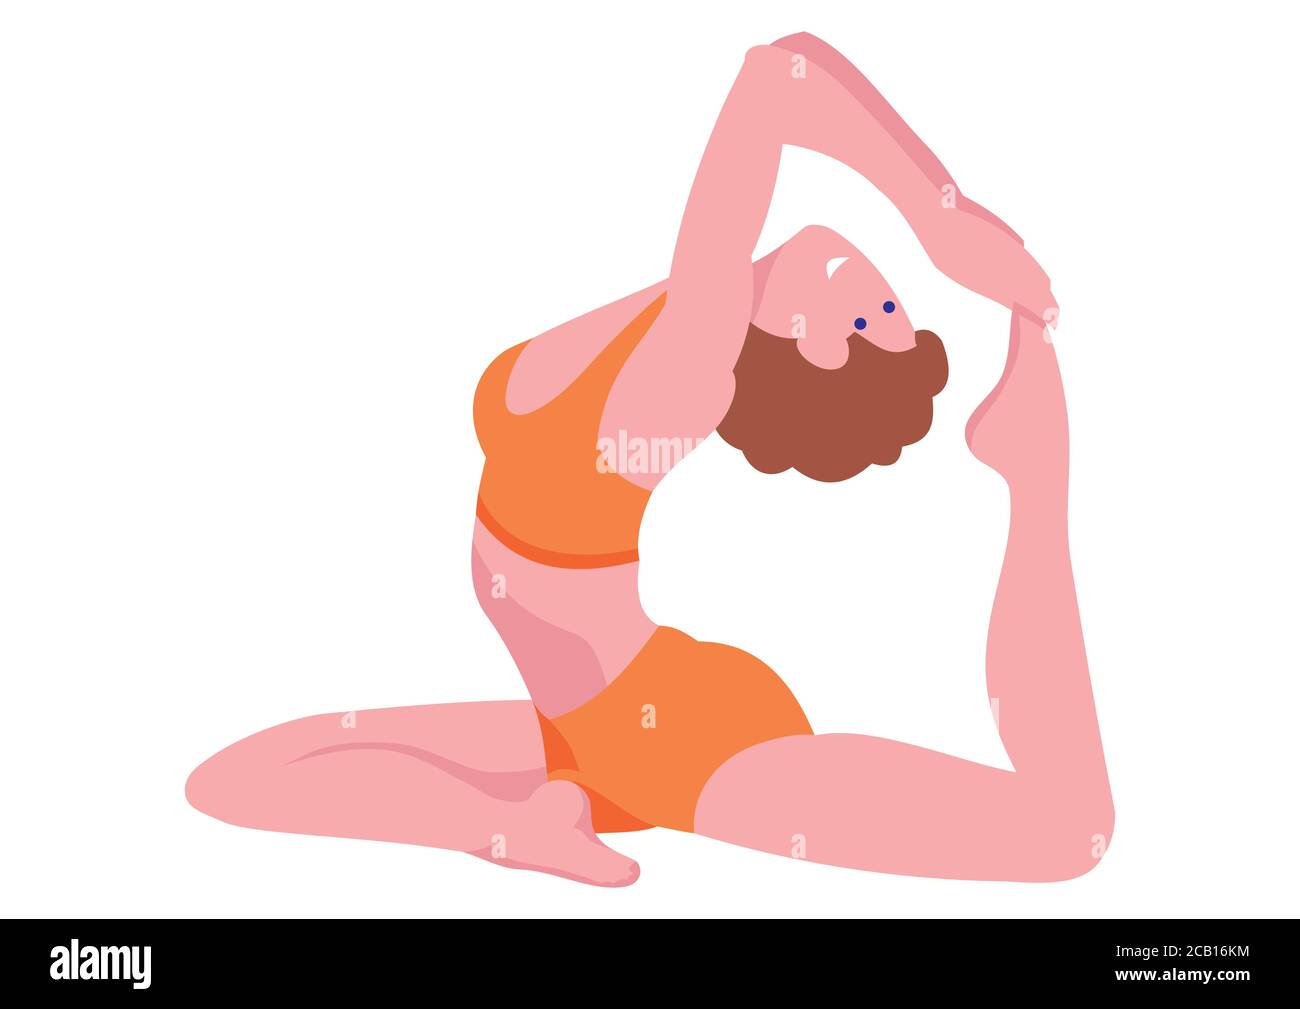 People silhouettes doing yoga on white background. Yoga class with people meditating and doing breathing exercise. Healthy life style. Stock Vector